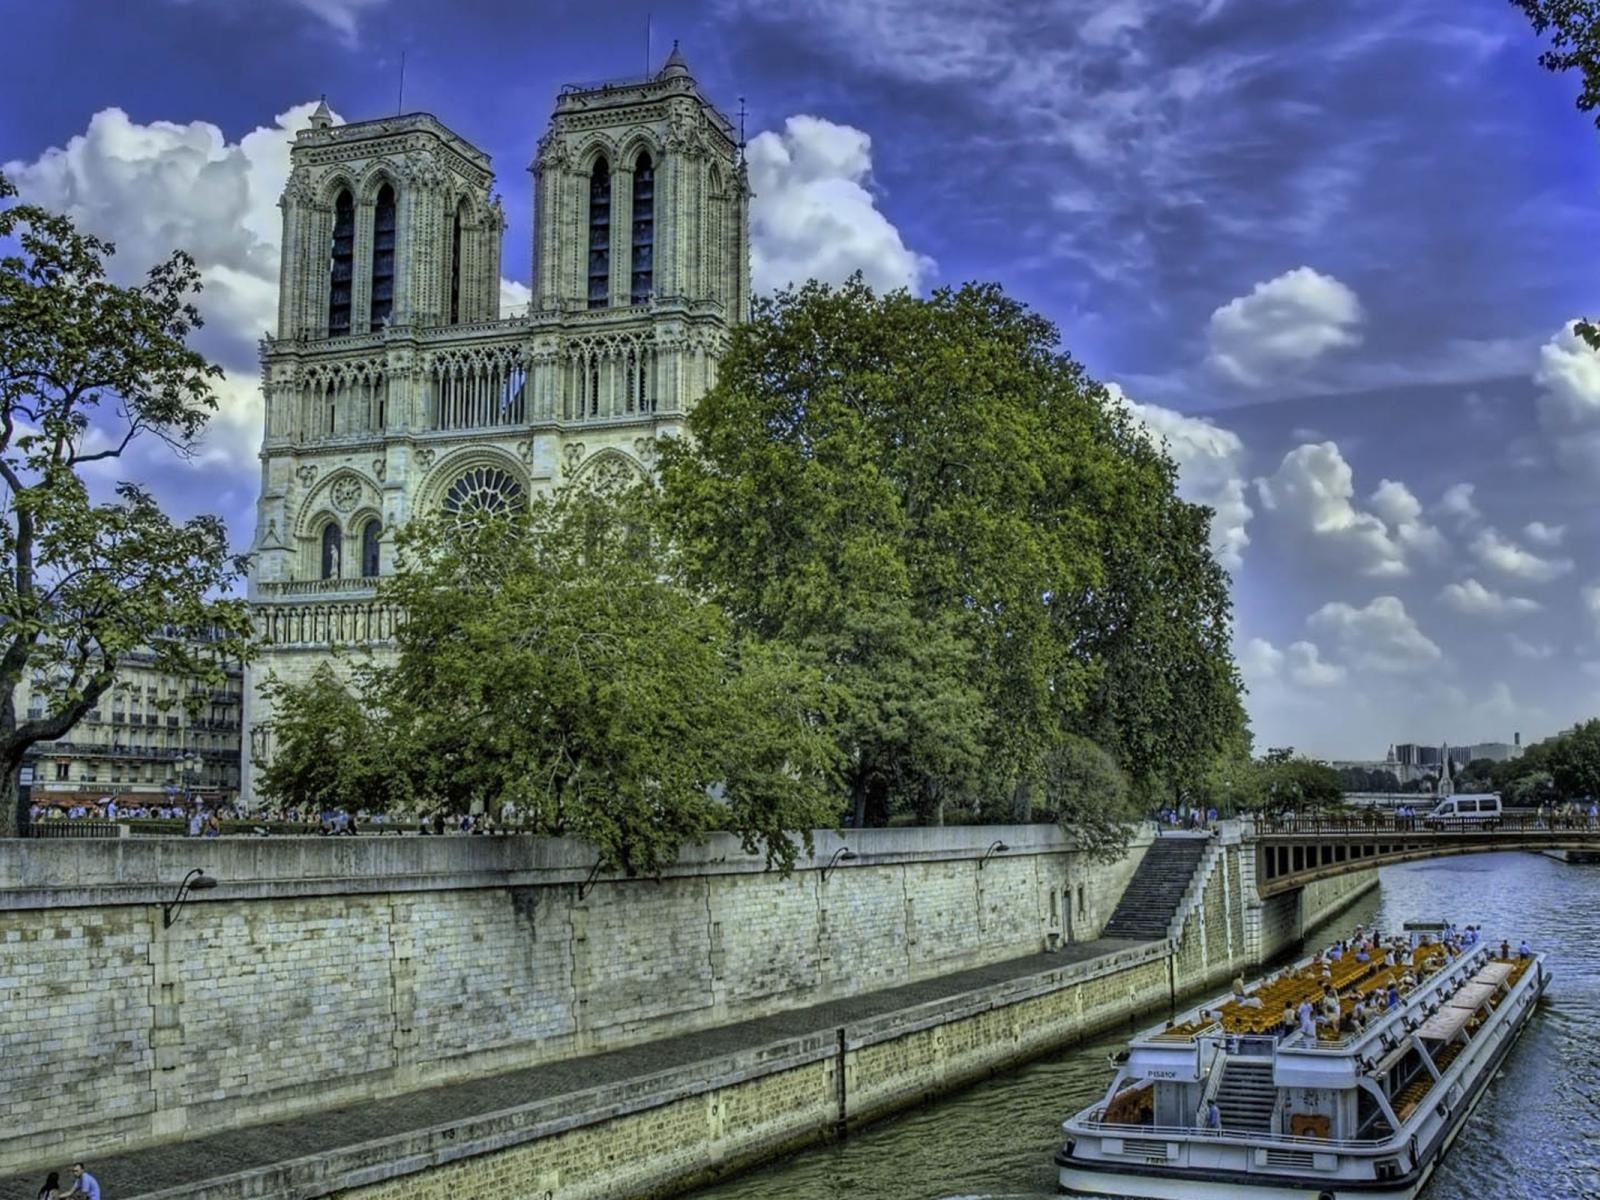 Notre Dame HD Wallpapers #10 - 1600x1200